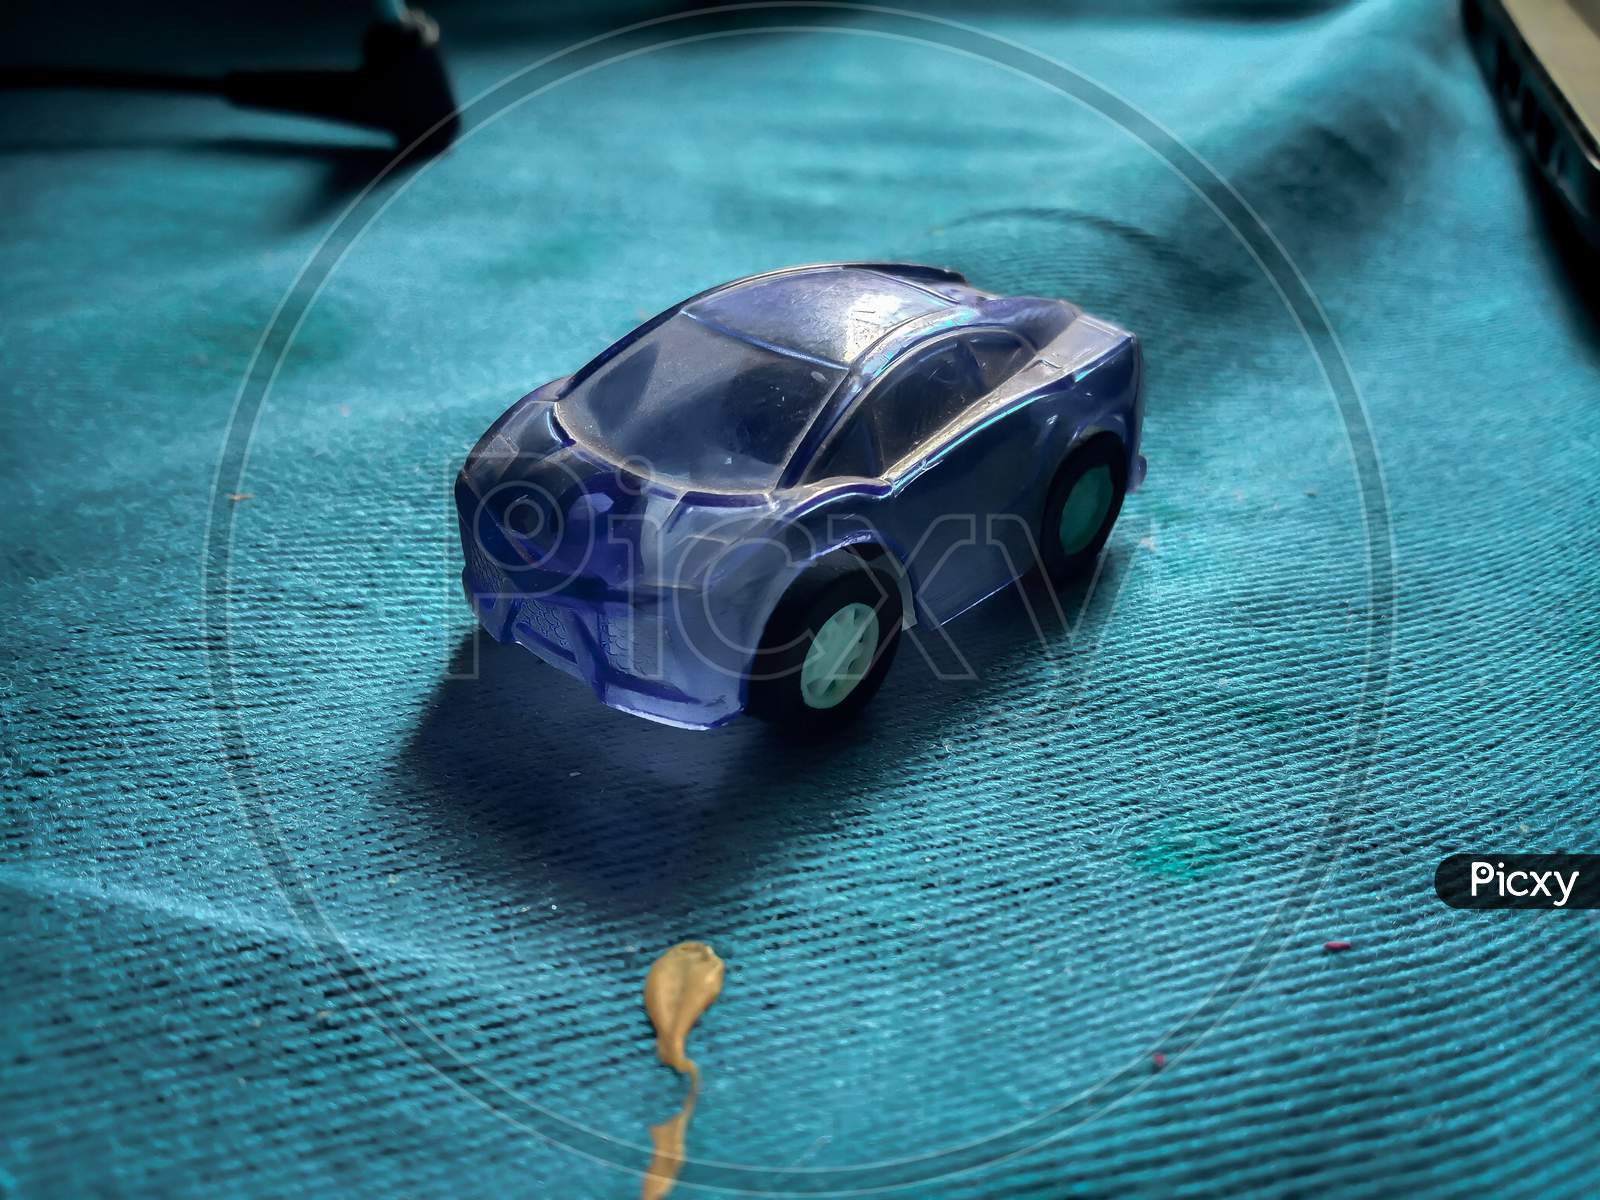 a small blue toy car image with some selective focus